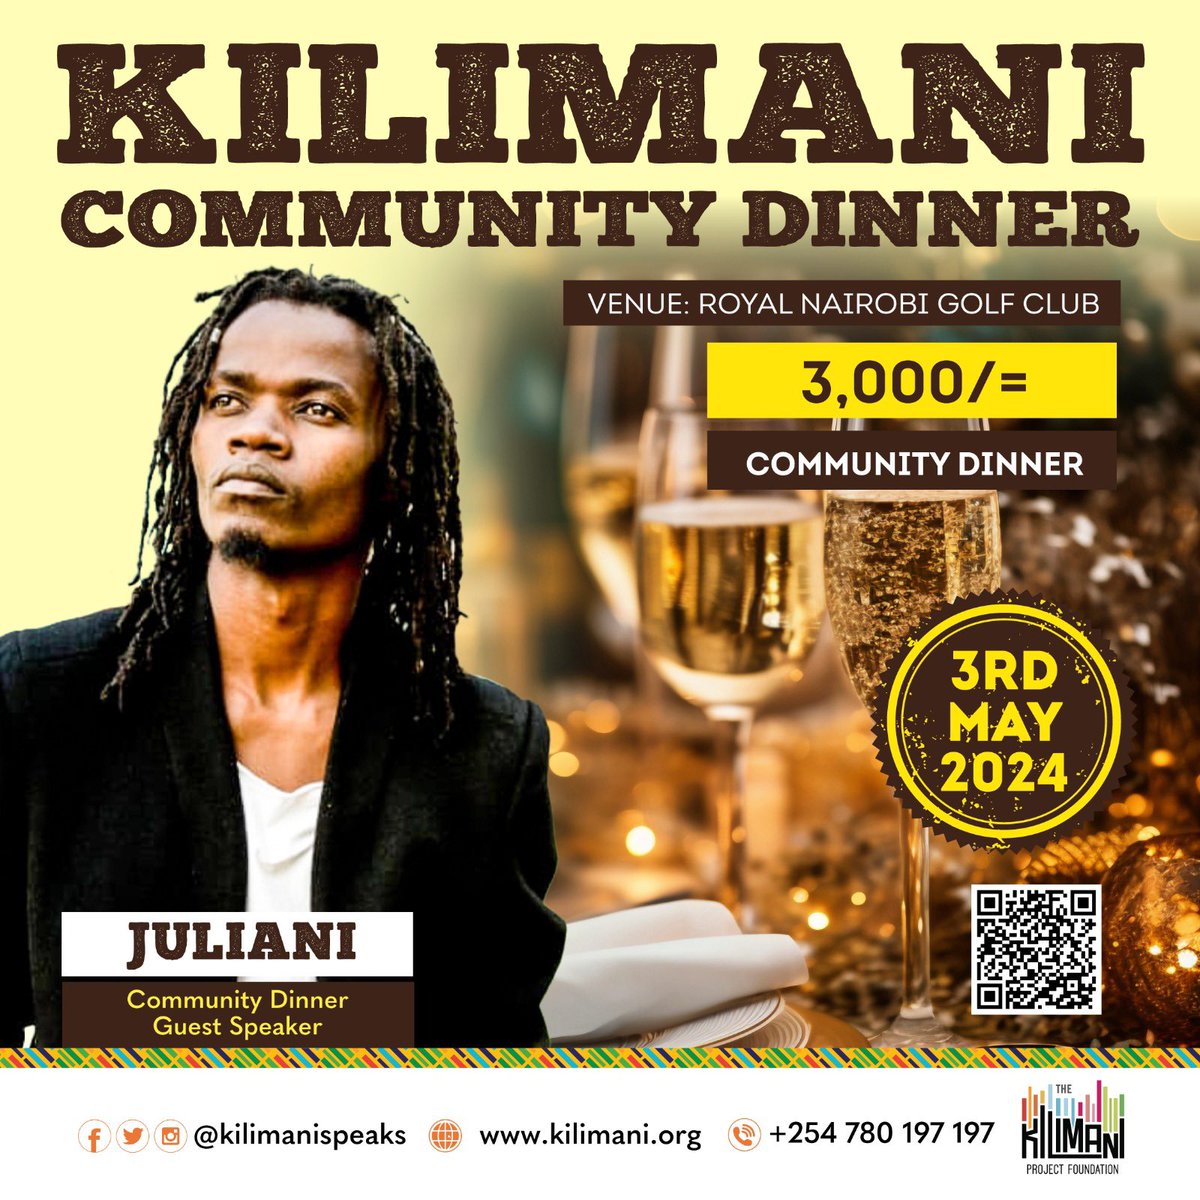 Have you purchased your tickets for the community dinner or are you ready to see videos and pictures kwa mtandao😂? Next Friday, we have @julianikenya coming to our community dinner🥳. All community members are invited to join us for a lively, loving, and laughter-filled